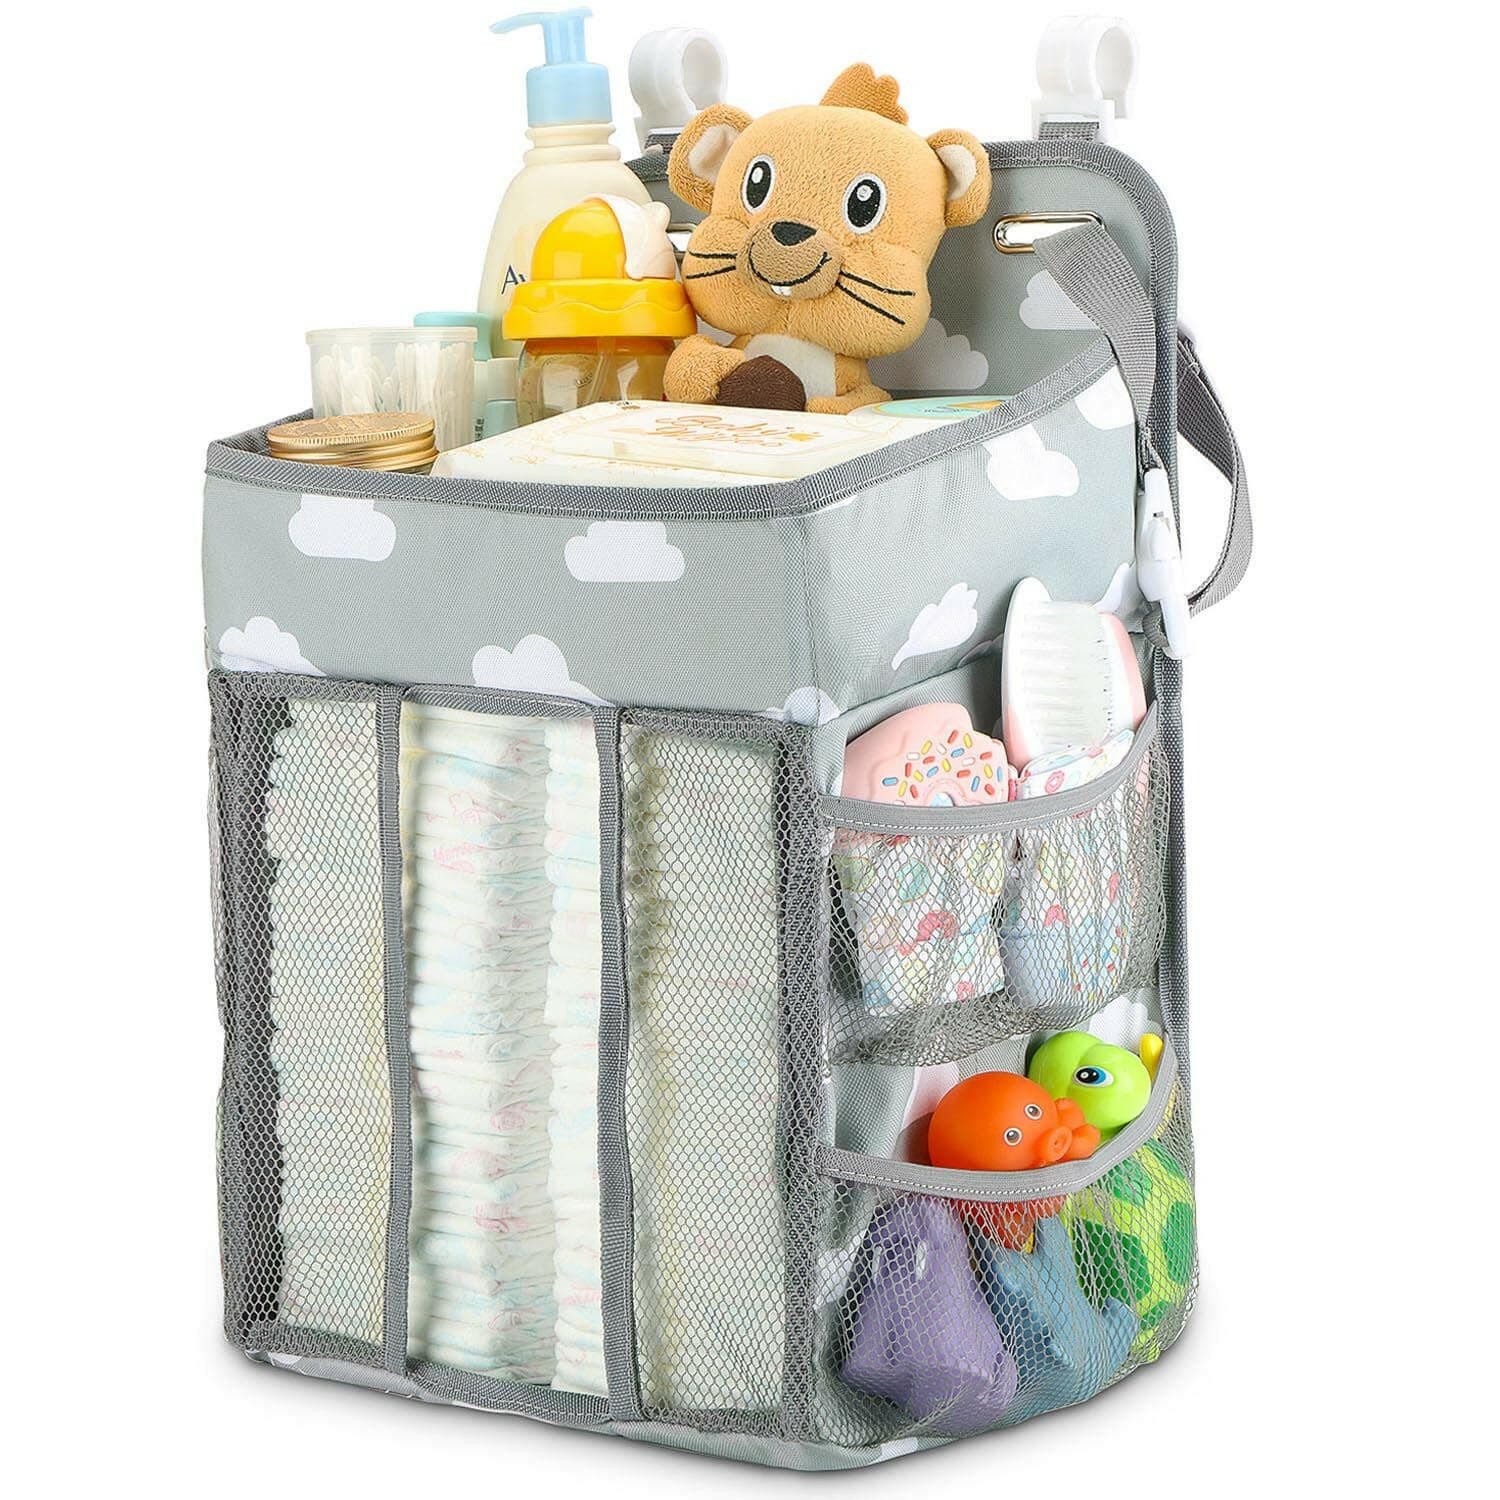 Hanging Diaper Caddy Organizer - Diaper Stacker for Changing Table or Crib.